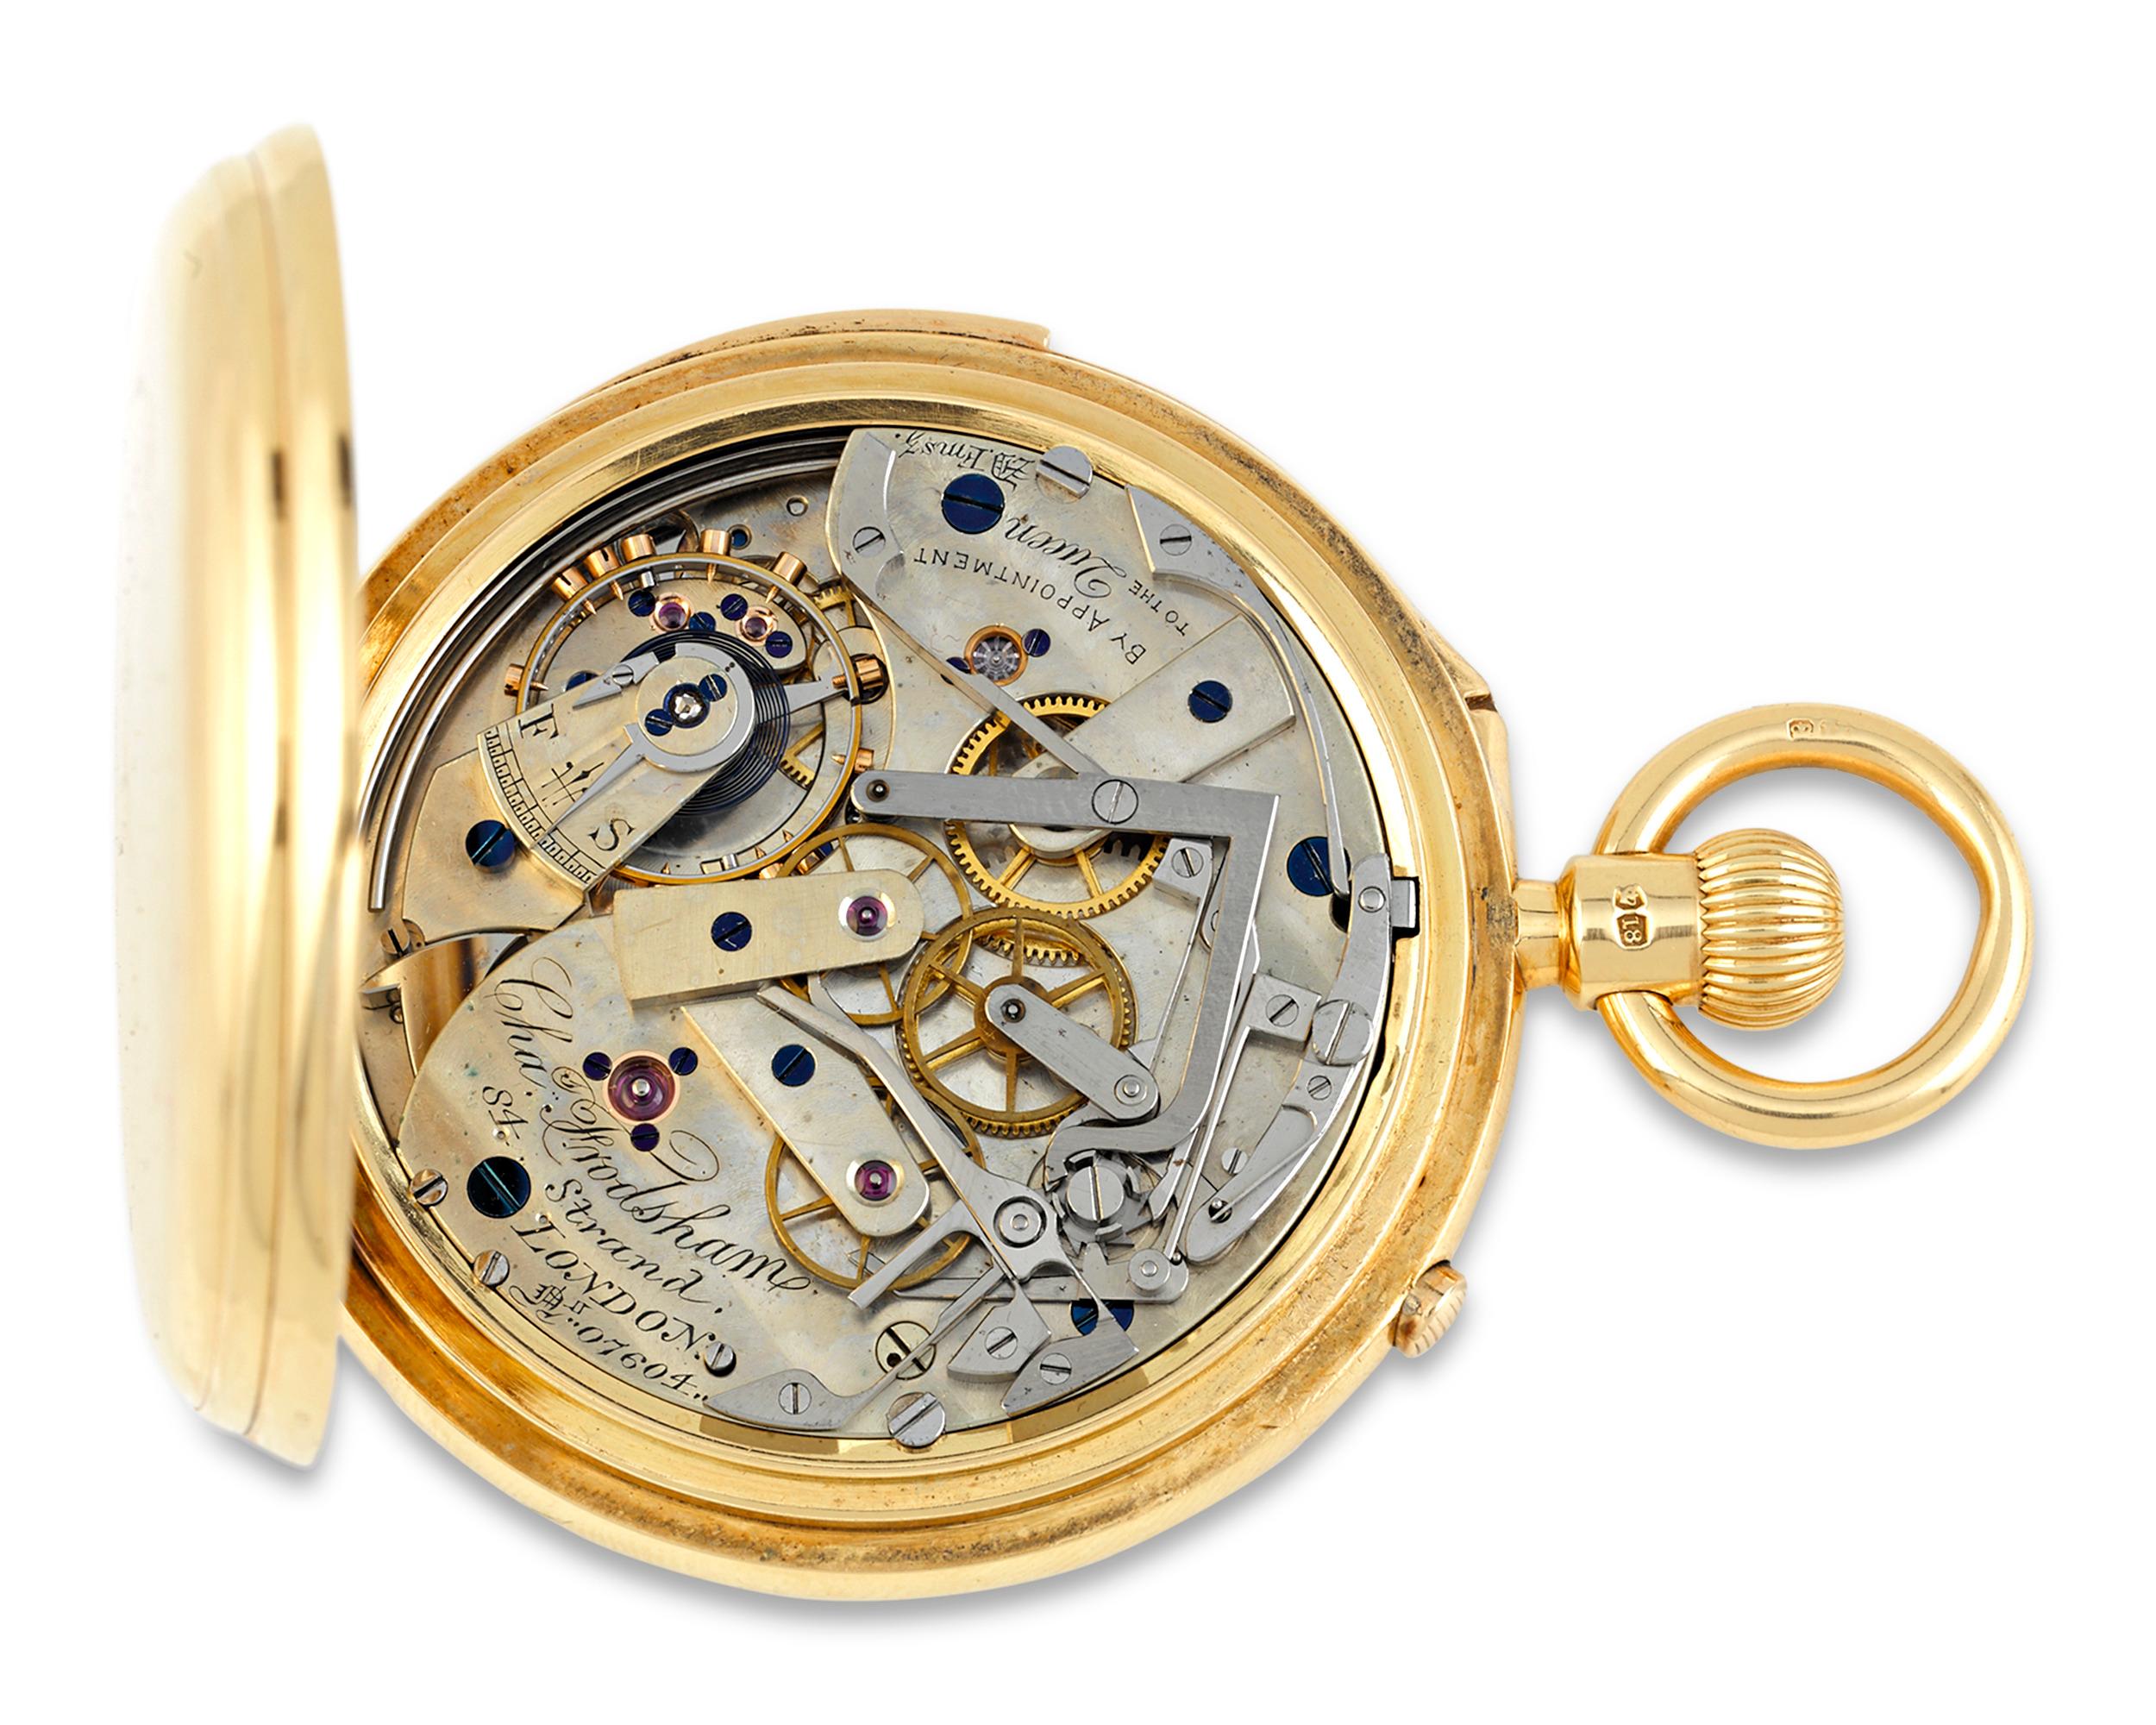 This exceptionally rare minute repeater pocket watch by the celebrated firm of Charles Frodsham is a specimen of precision timekeeping. The spectacular timepiece boasts a minute repeater, which, at the push of a button, chimes the hours, quarter